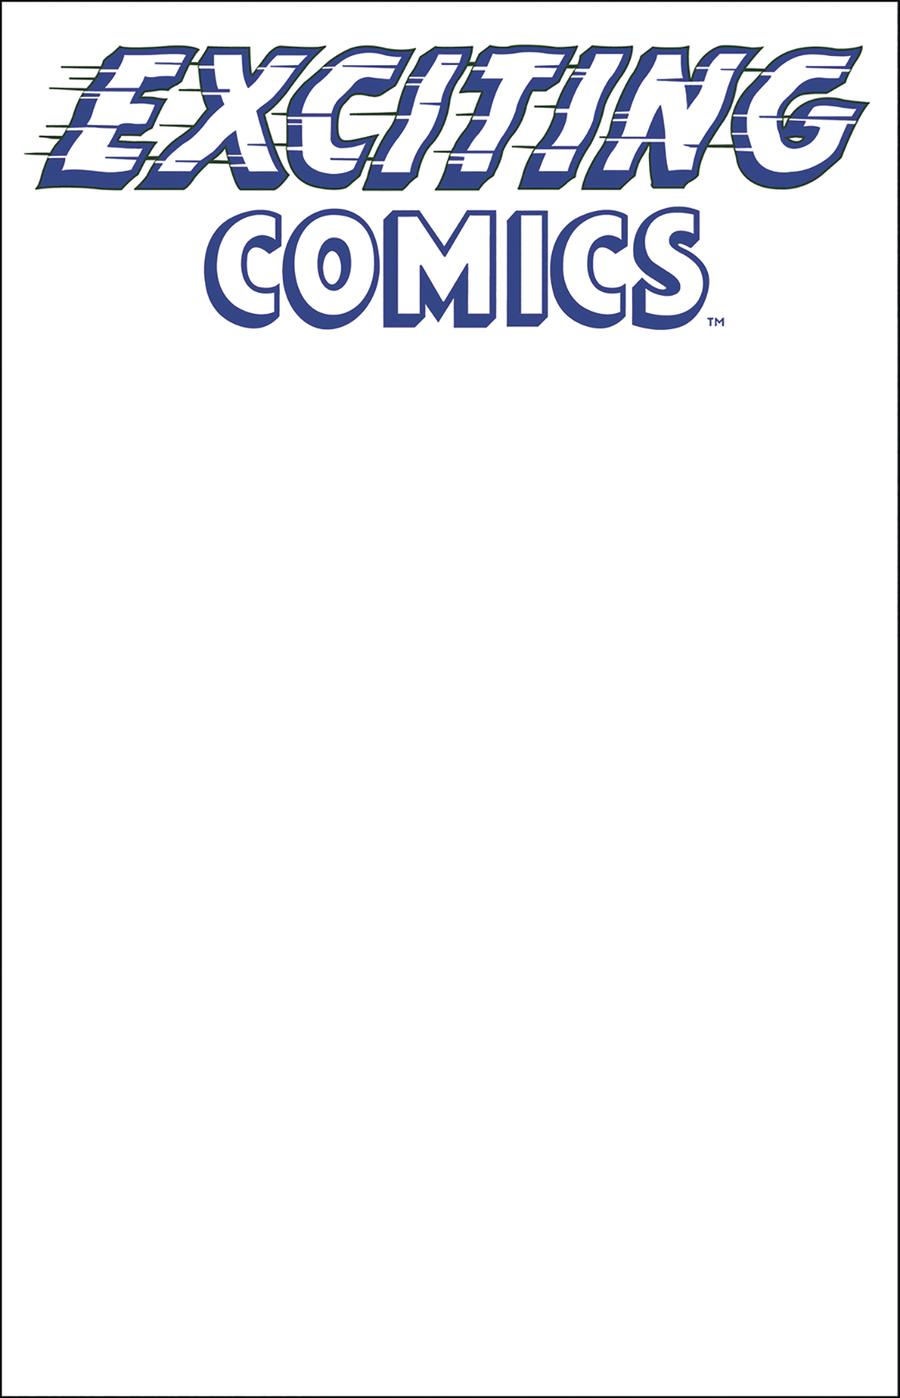 Exciting Comics Vol 2 #1 Cover F Variant Blank Cover